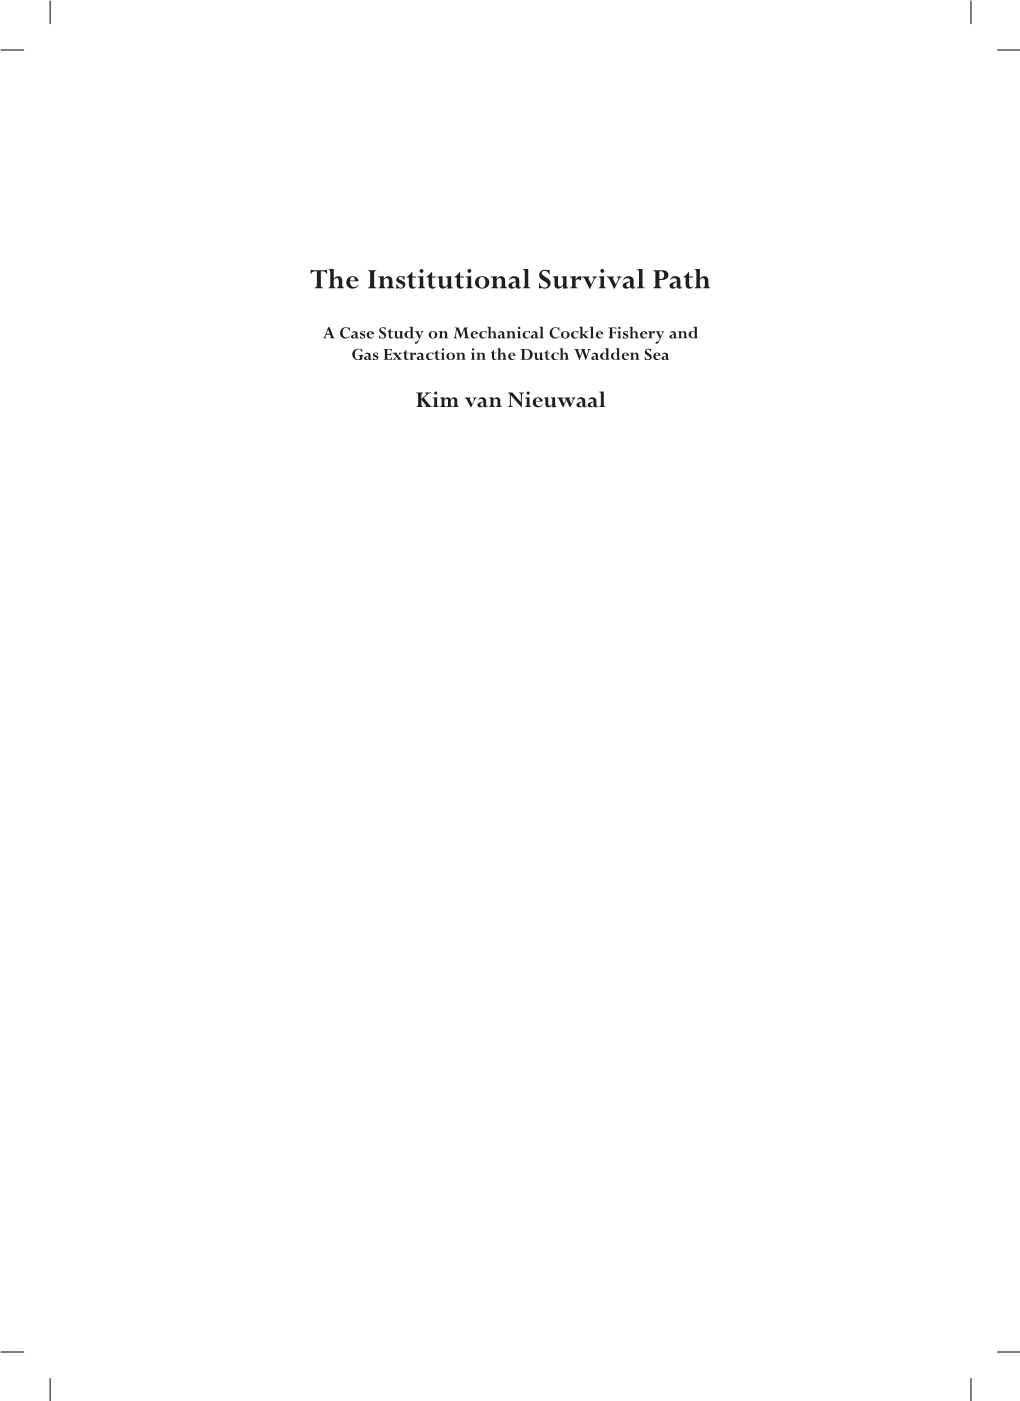 The Institutional Survival Path